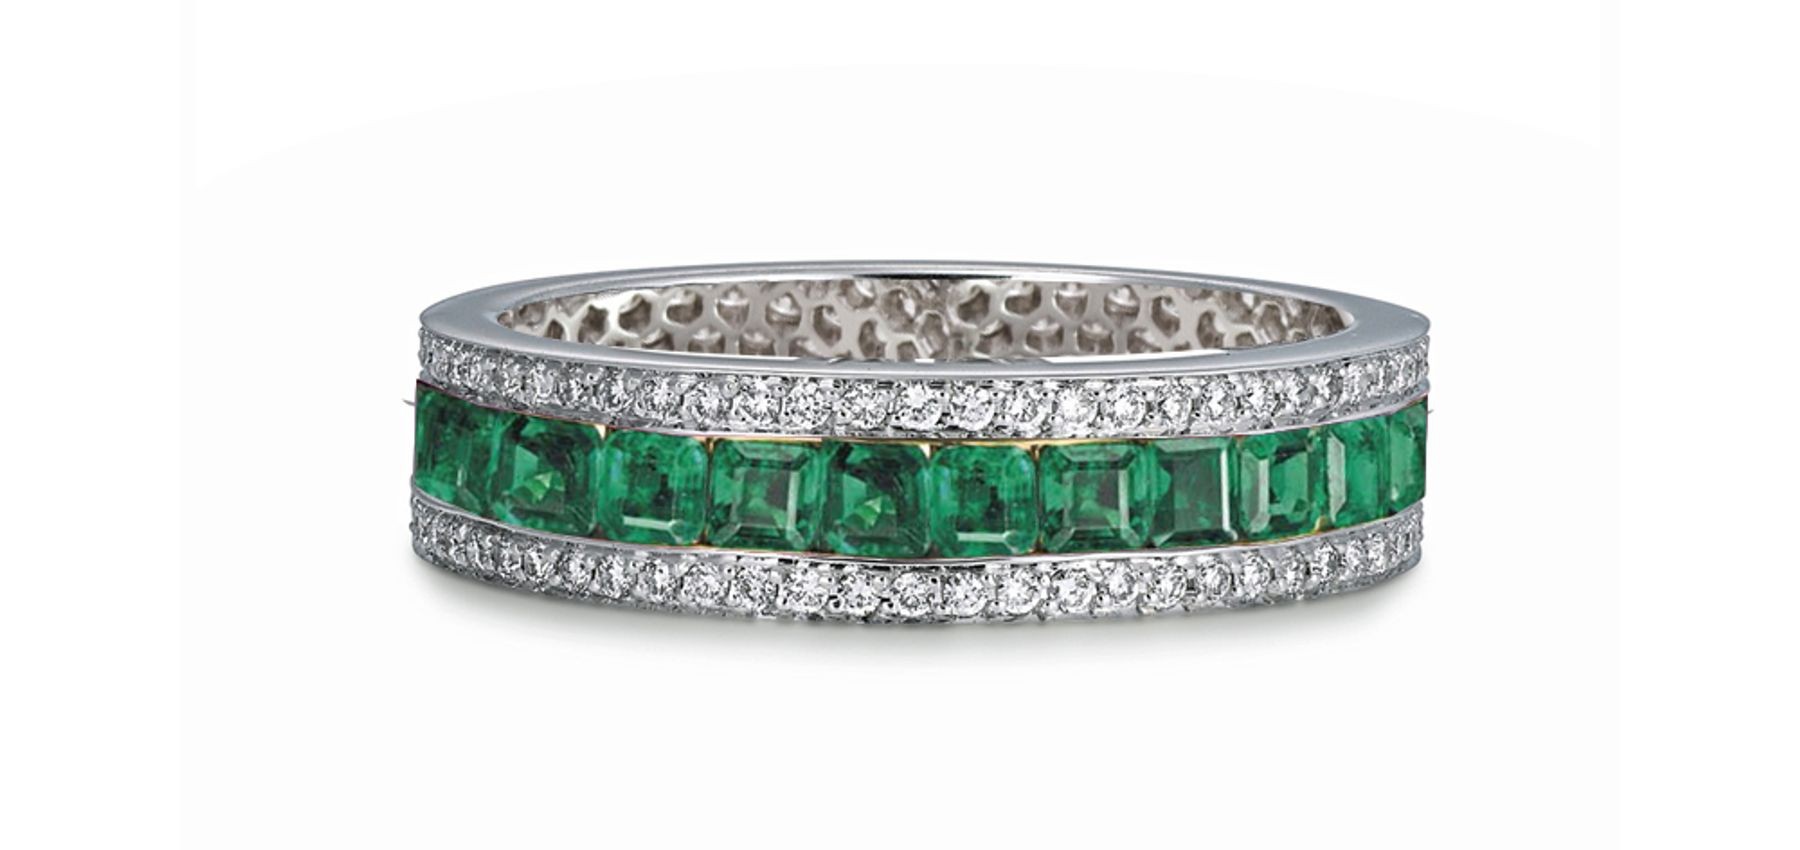 Shop Fine Quality Made To Order Round pave Prong Bezel Set Diamond & Square Emerald Eternity Style Wedding Bands